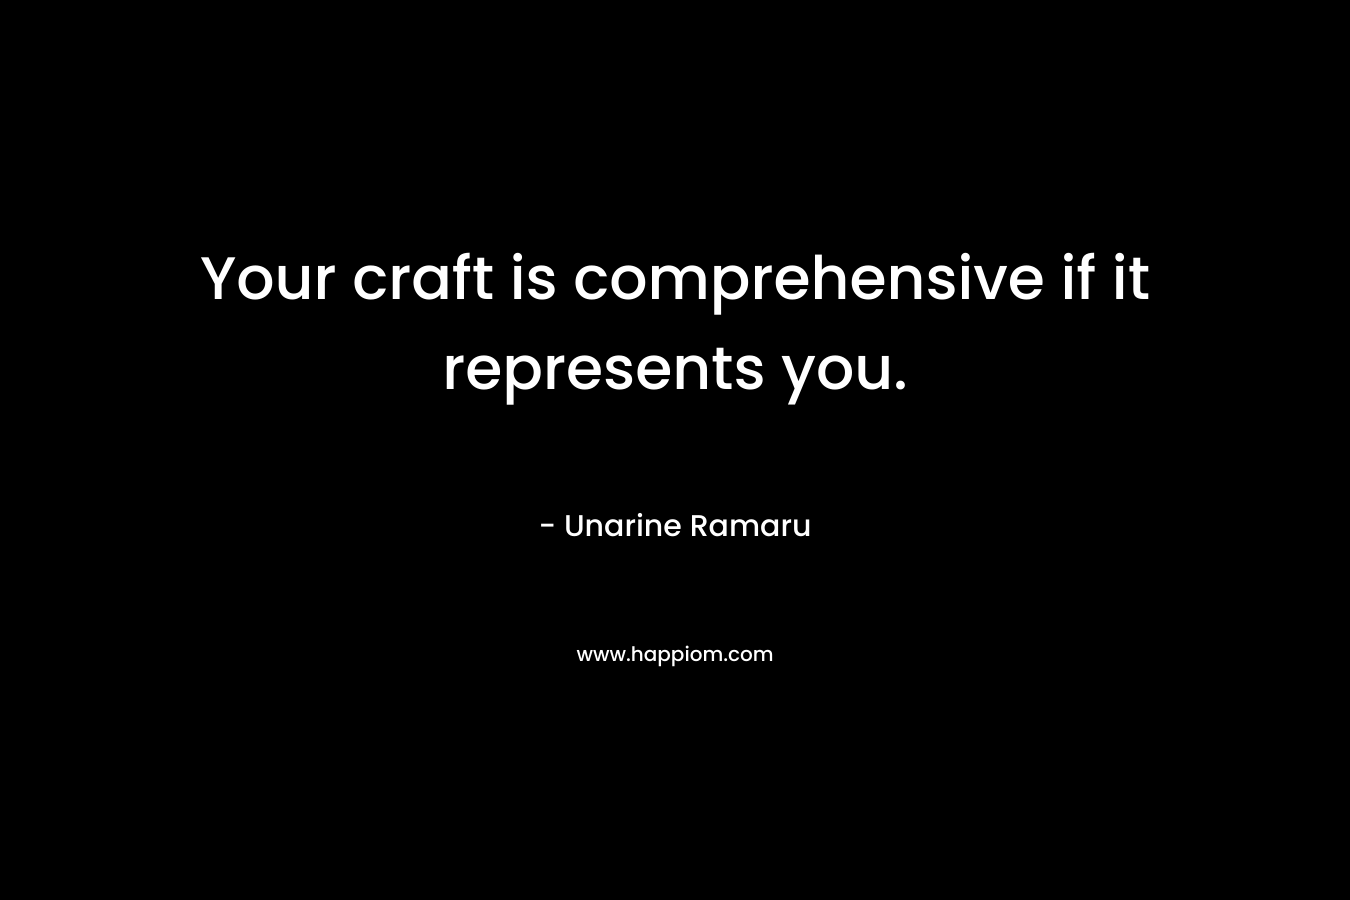 Your craft is comprehensive if it represents you.